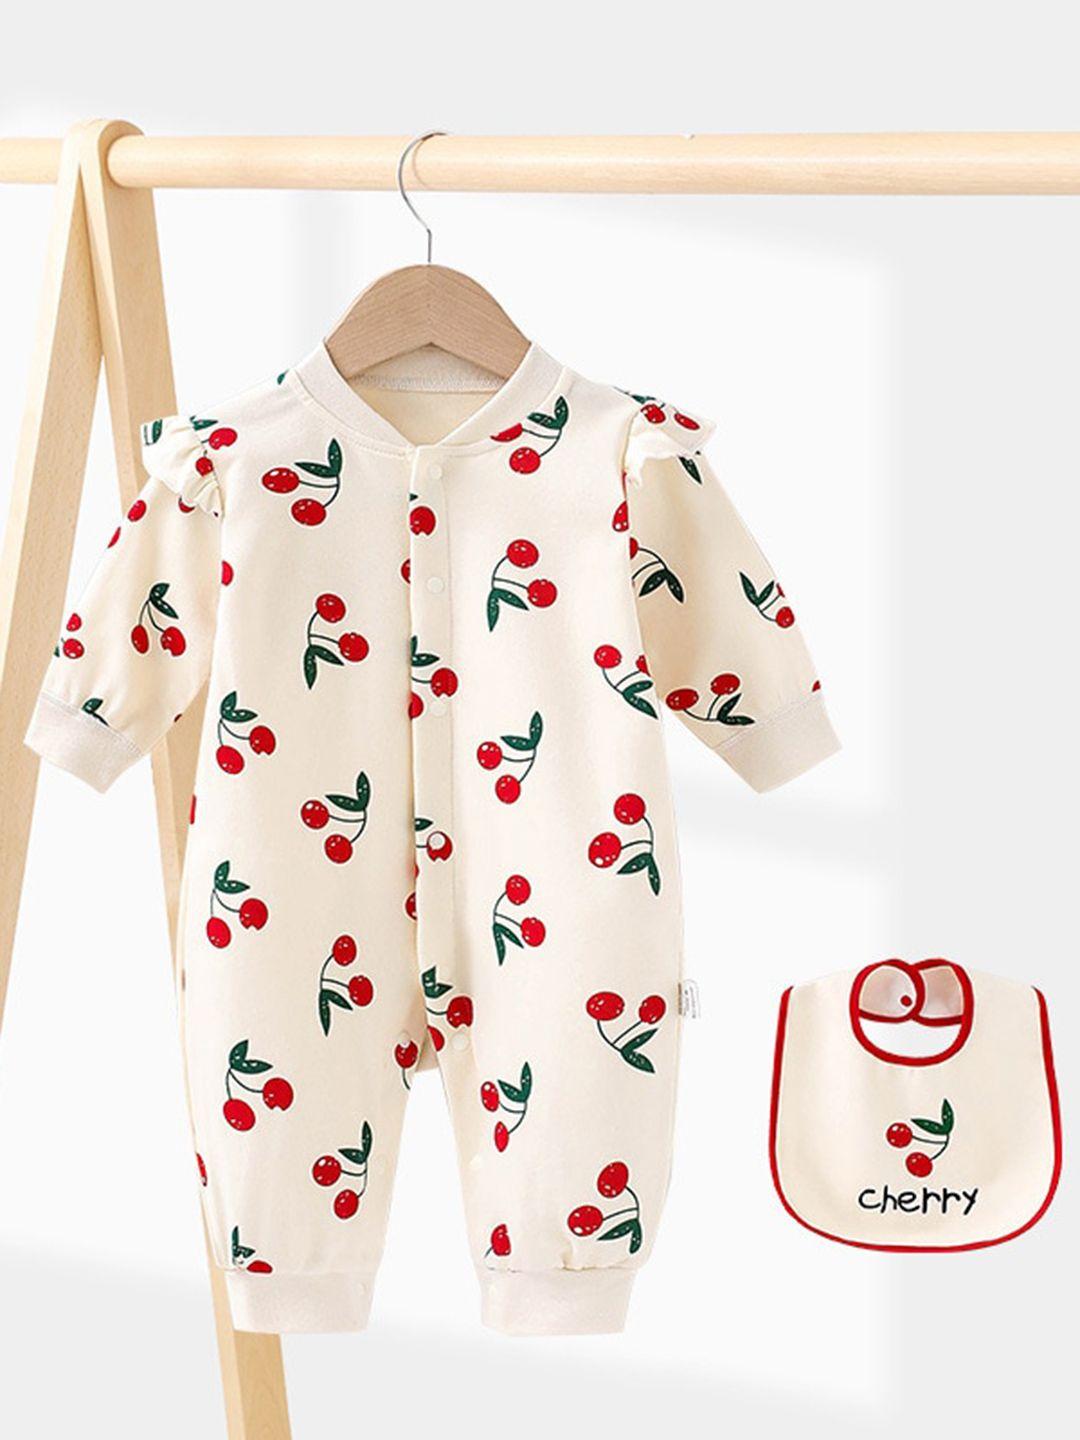 stylecast infants girls cream & red printed cotton rompers